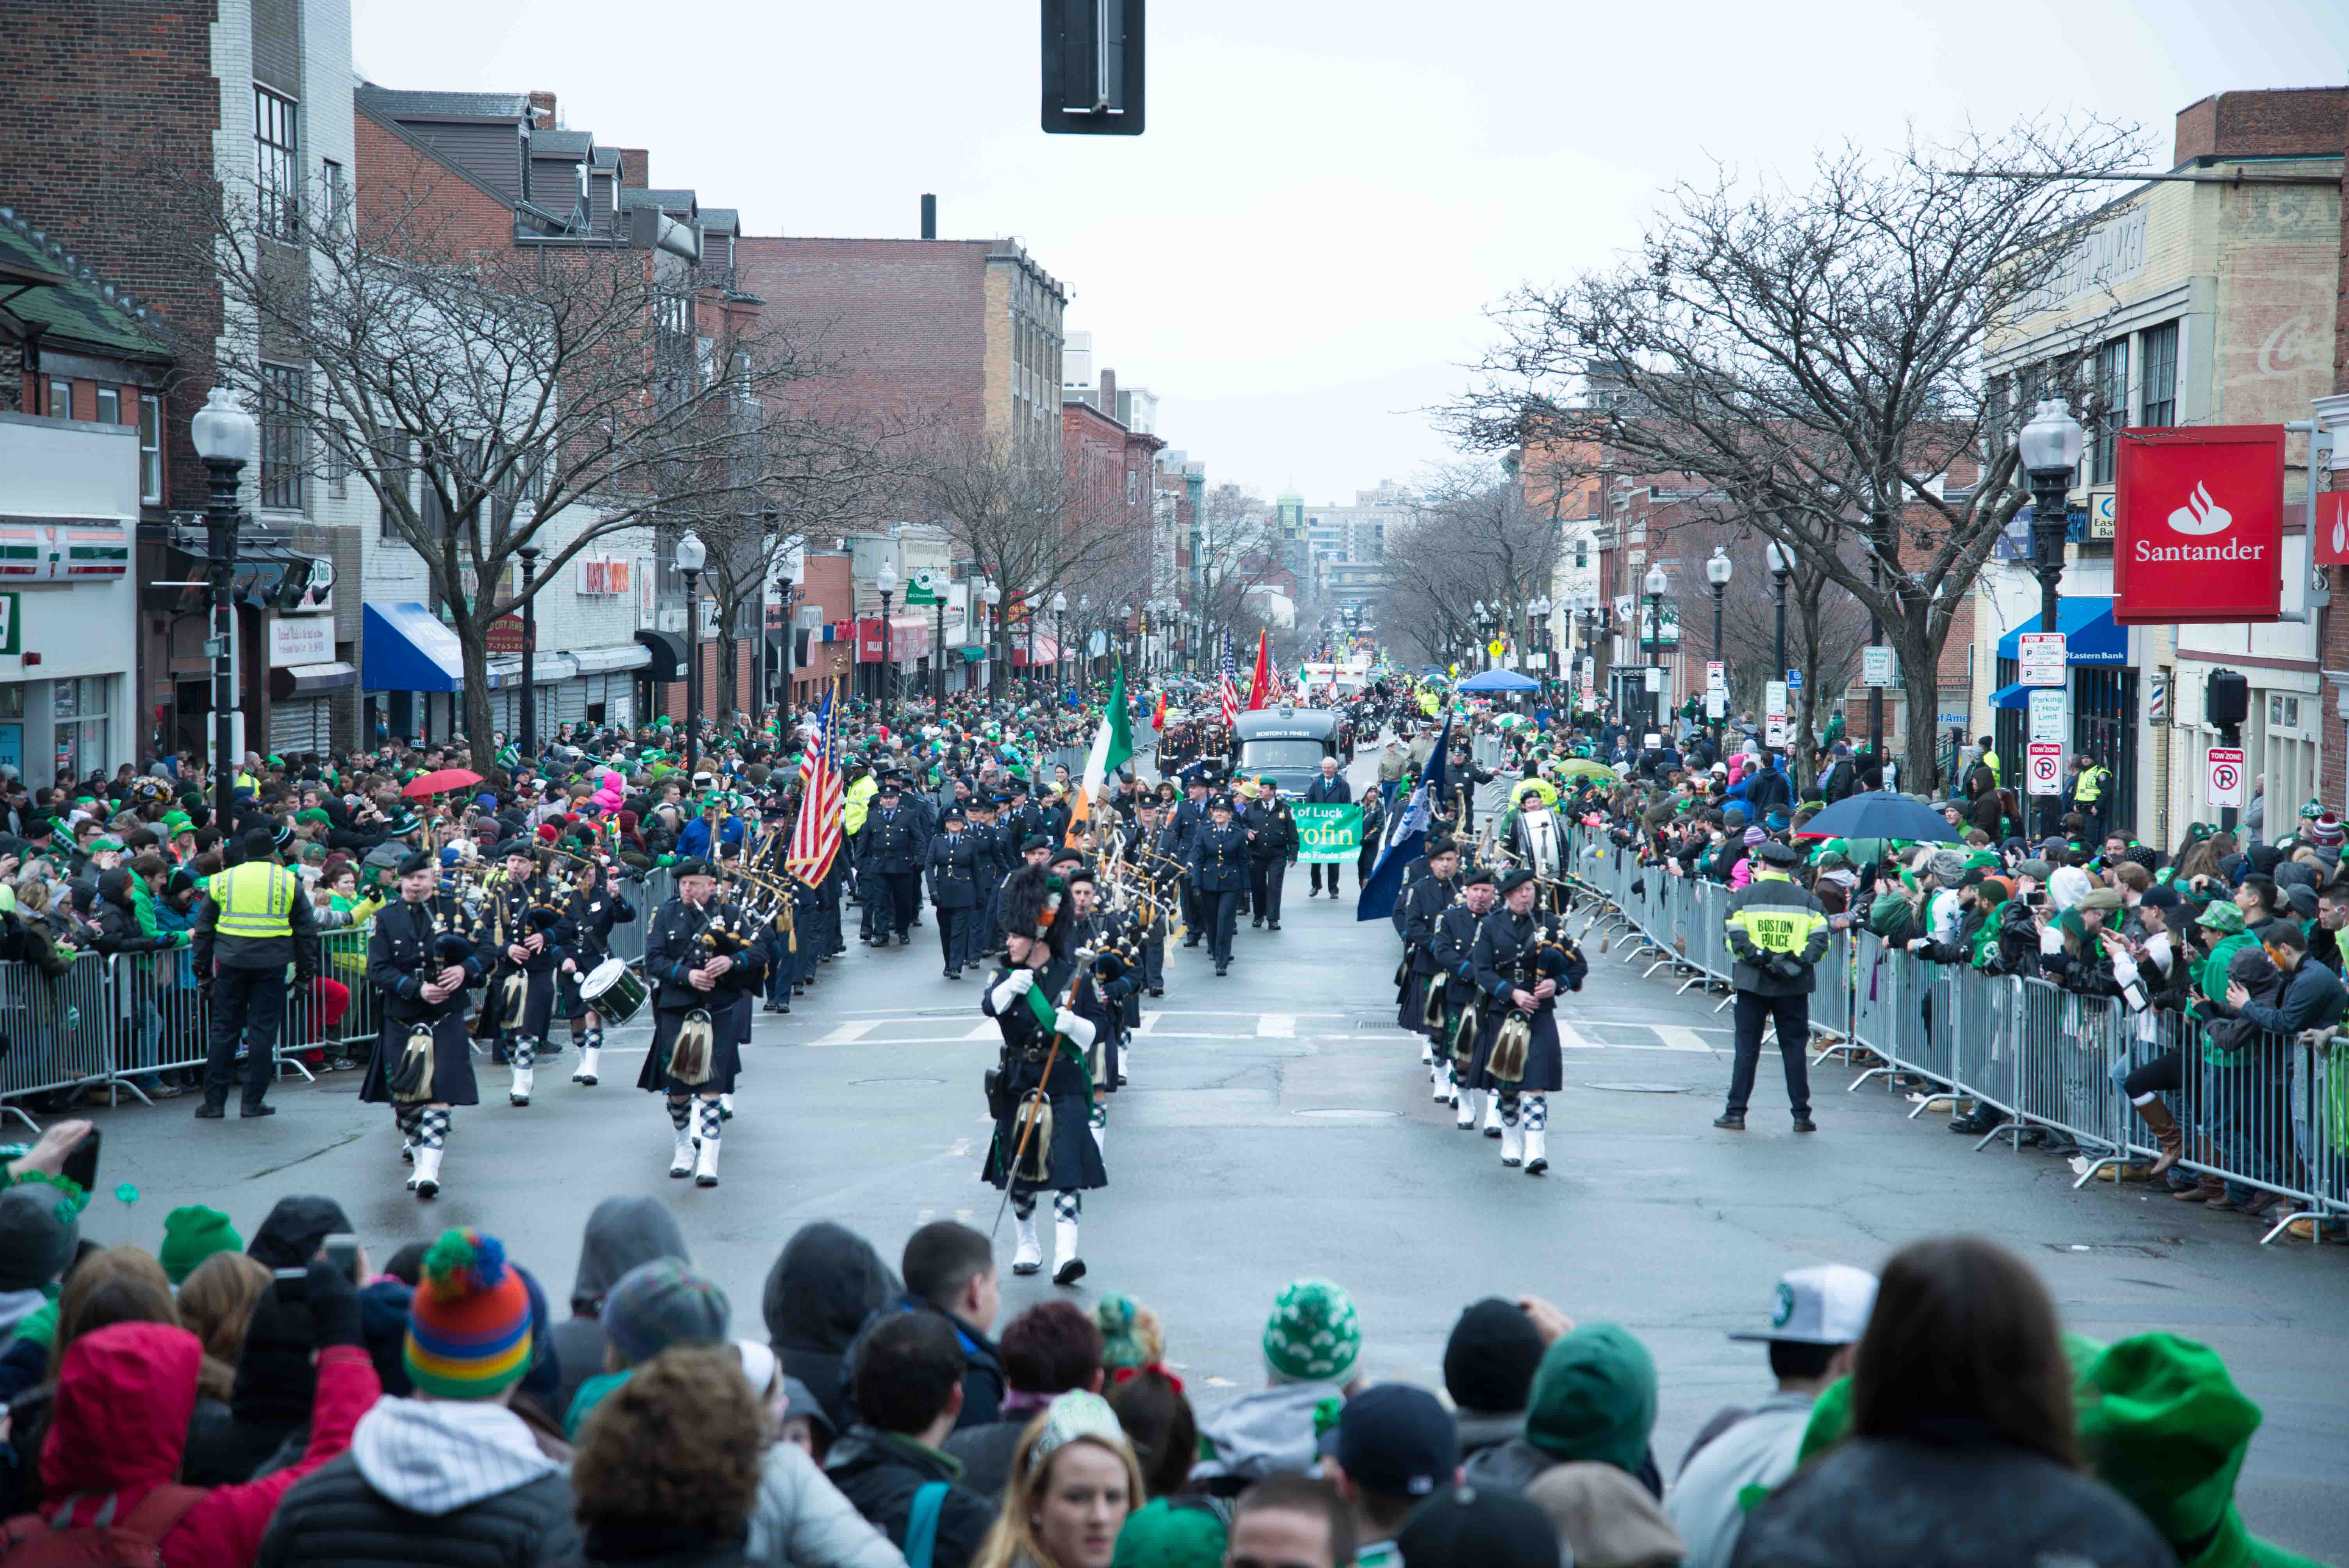 Southie rings in St. Patrick’s Day The Huntington News